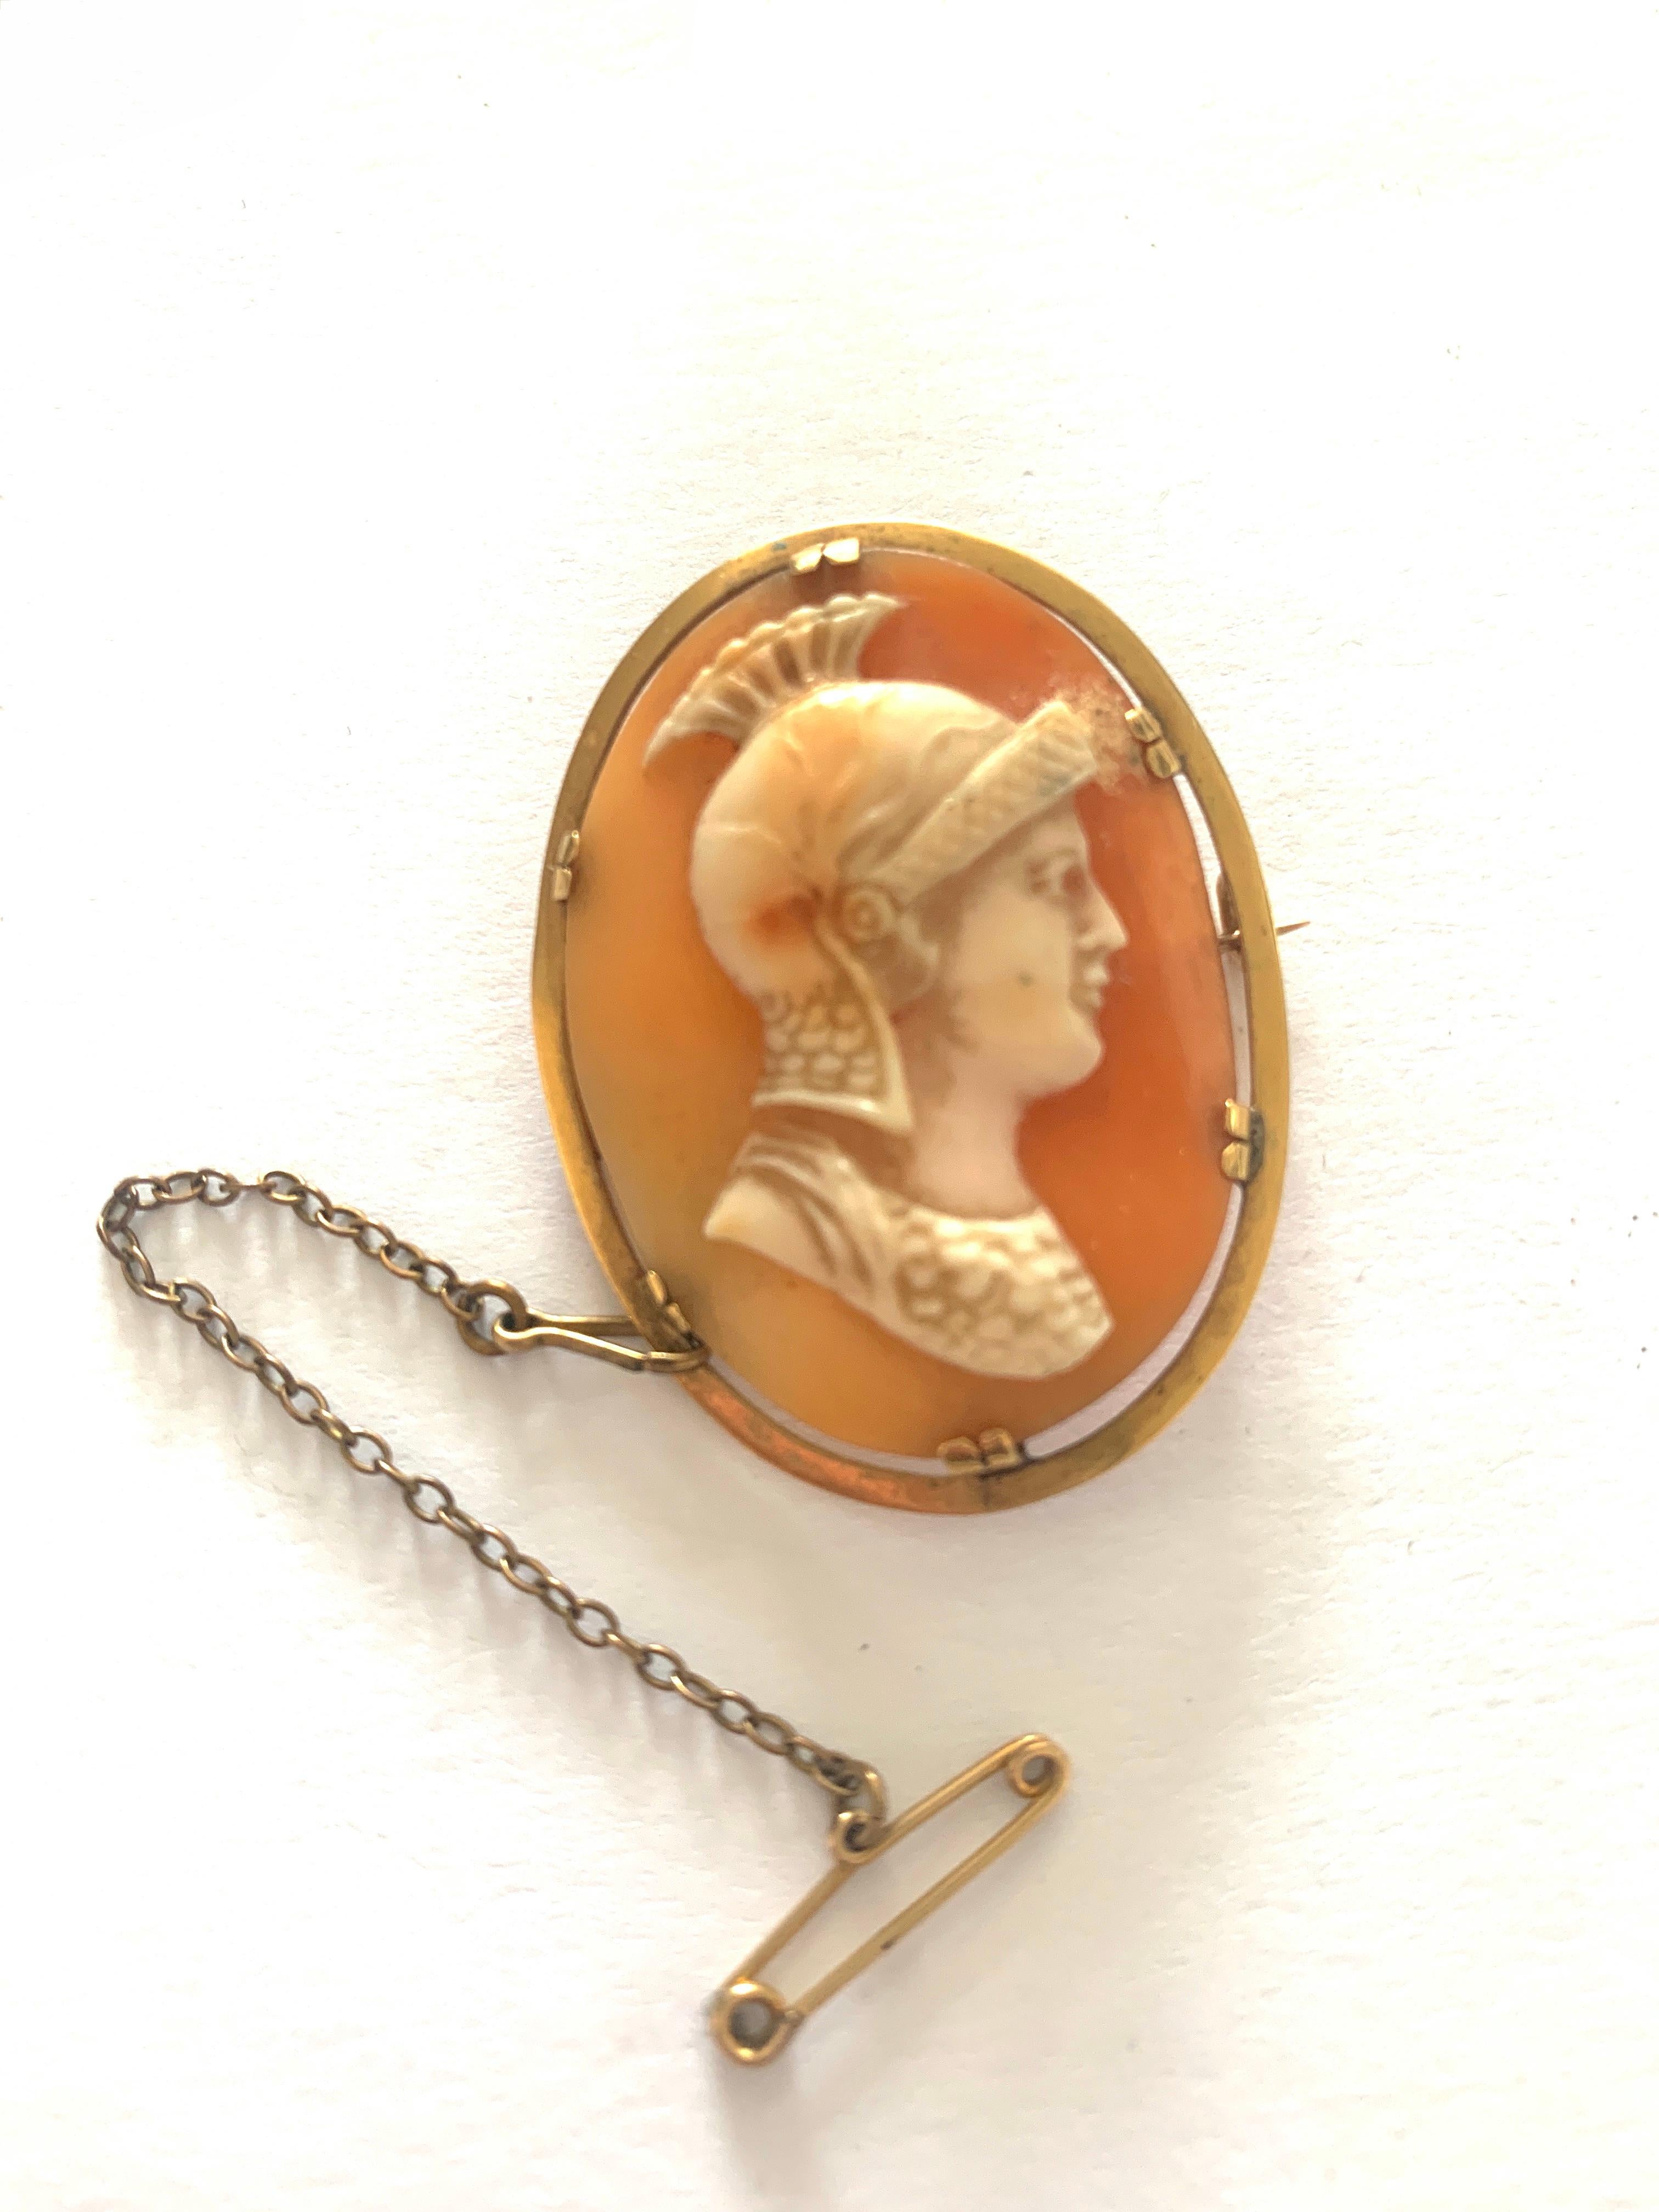 Antique 18ct Gold Centurion Cameo Brooch

This Edwardian natural shell hand carved cameo
depicts a handsome centurion of Roman Empire design.

The gold settings is 18ct Gold and is marked 